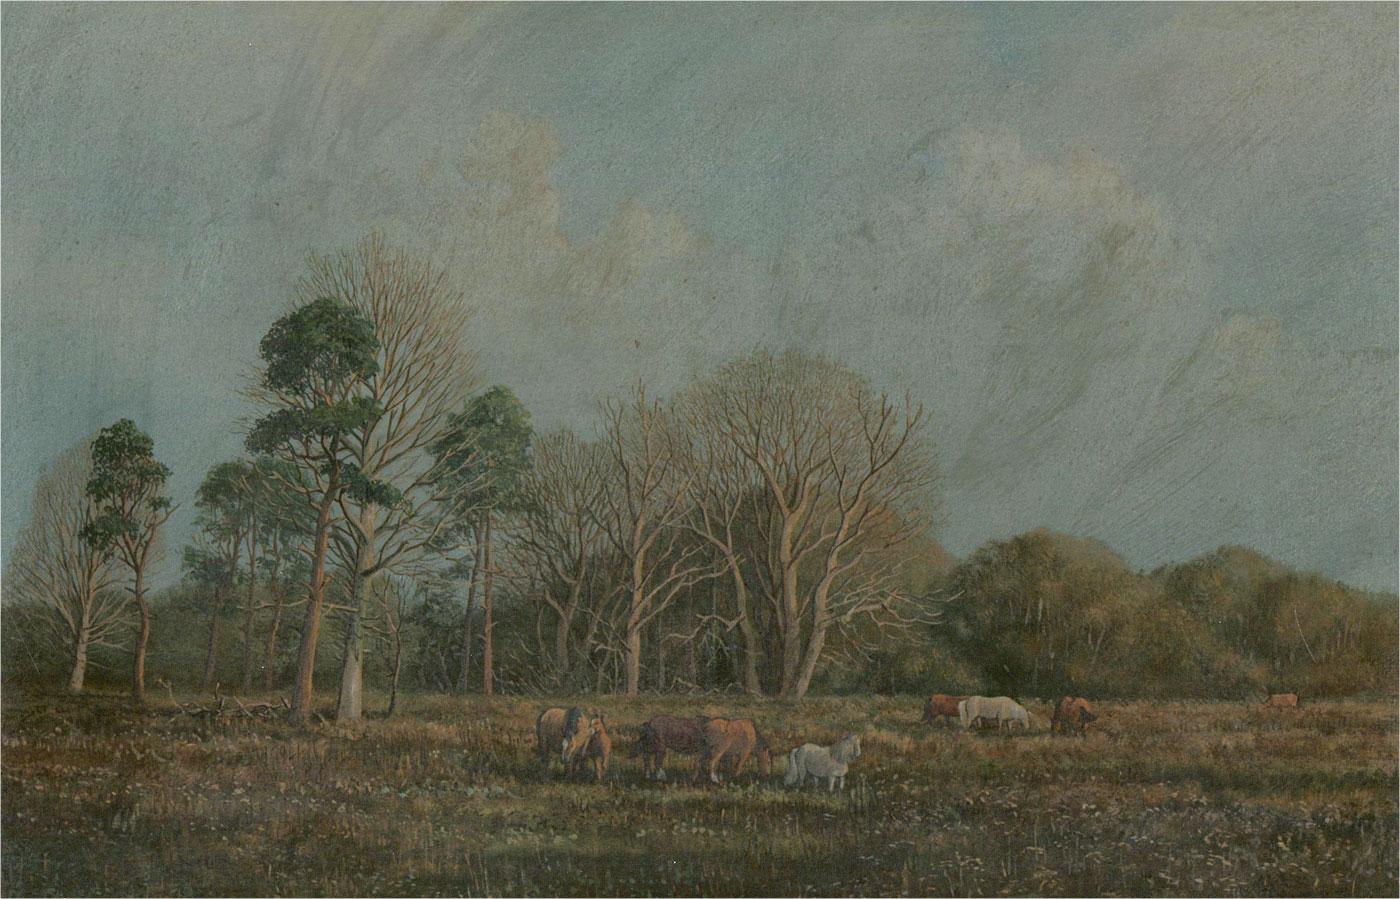 A landscape in the New Forest, populated by New Forest ponies grazing freely on the moorland. Presented in an ornate gilt-effect wooden frame with a linen slip. Signed to the lower-right edge. Title and date inscribed on the verso. On board.
